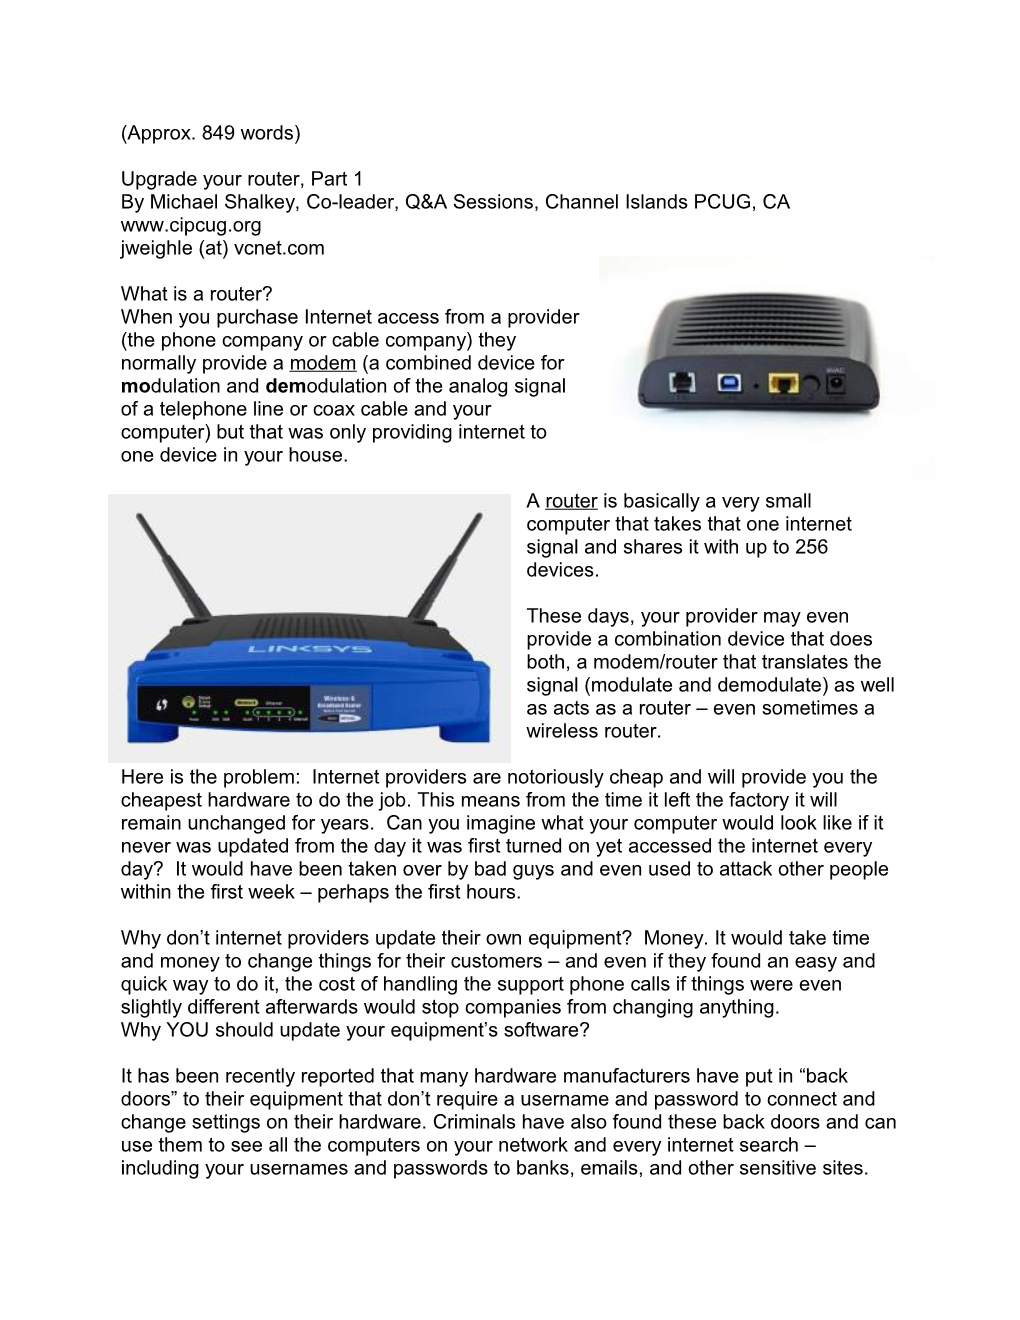 Upgrade Your Router, Part 1